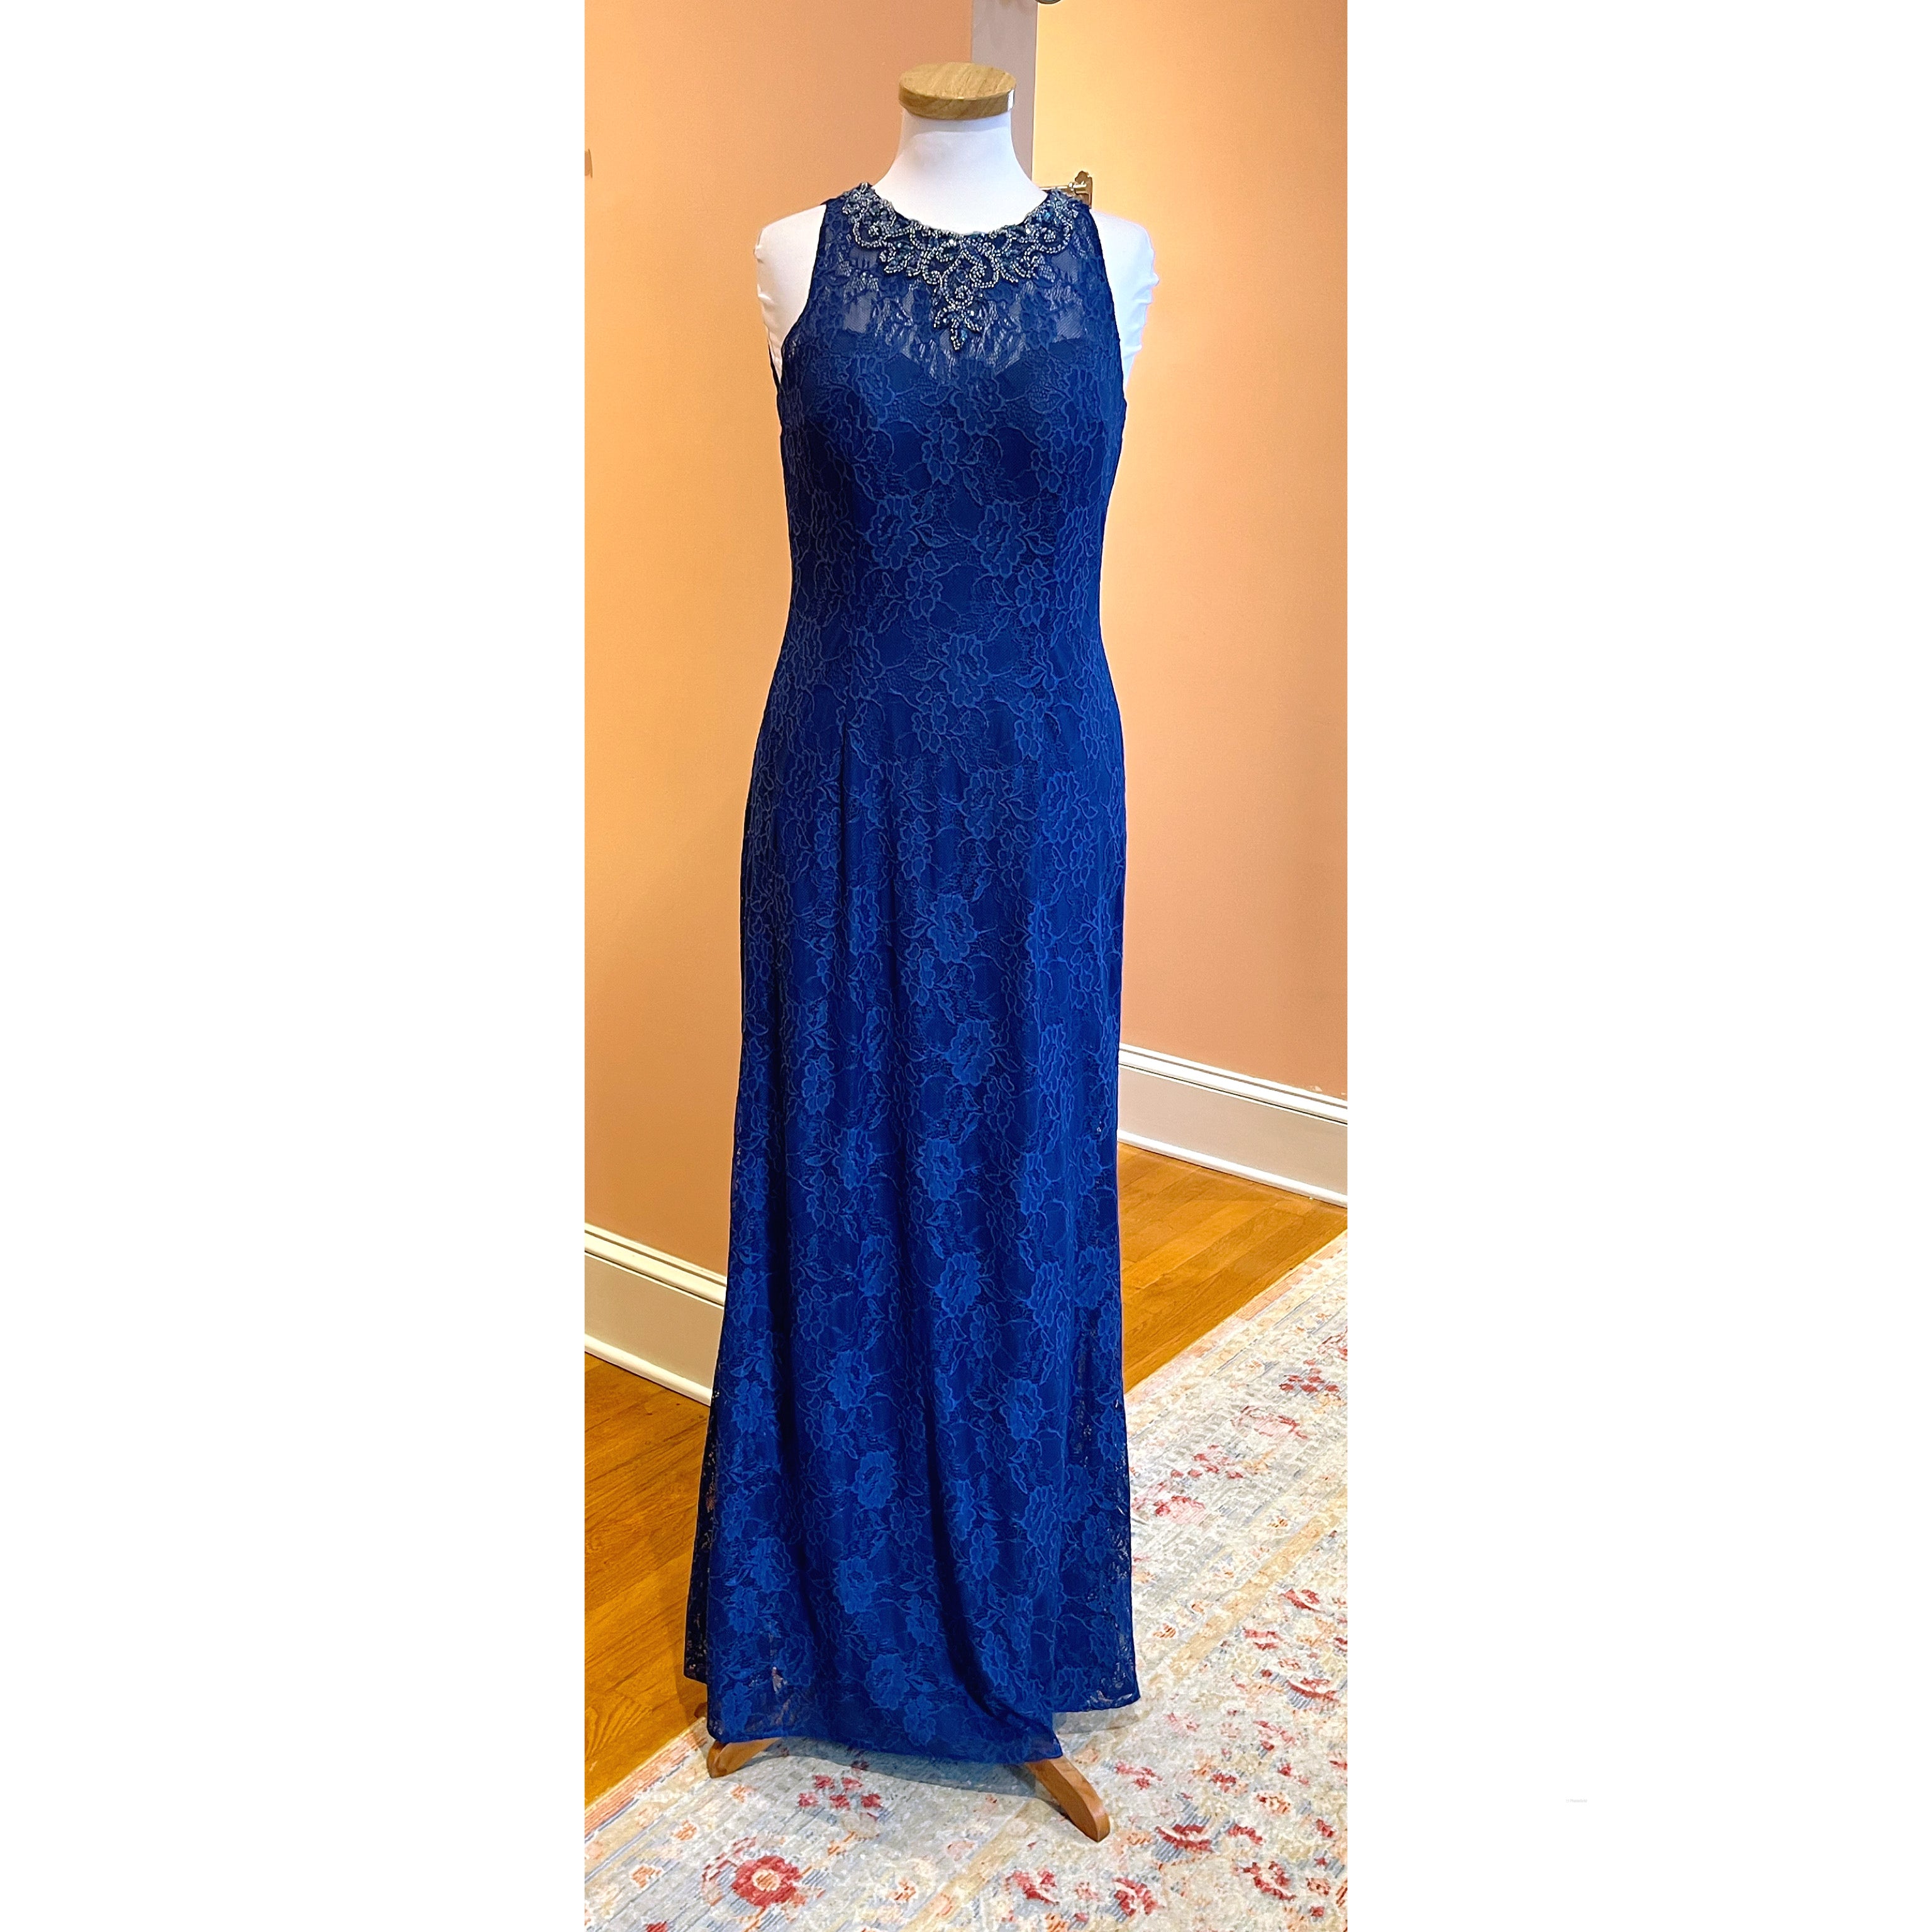 Jade Couture cobalt blue dress, size 4, NEW WITH TAGS!